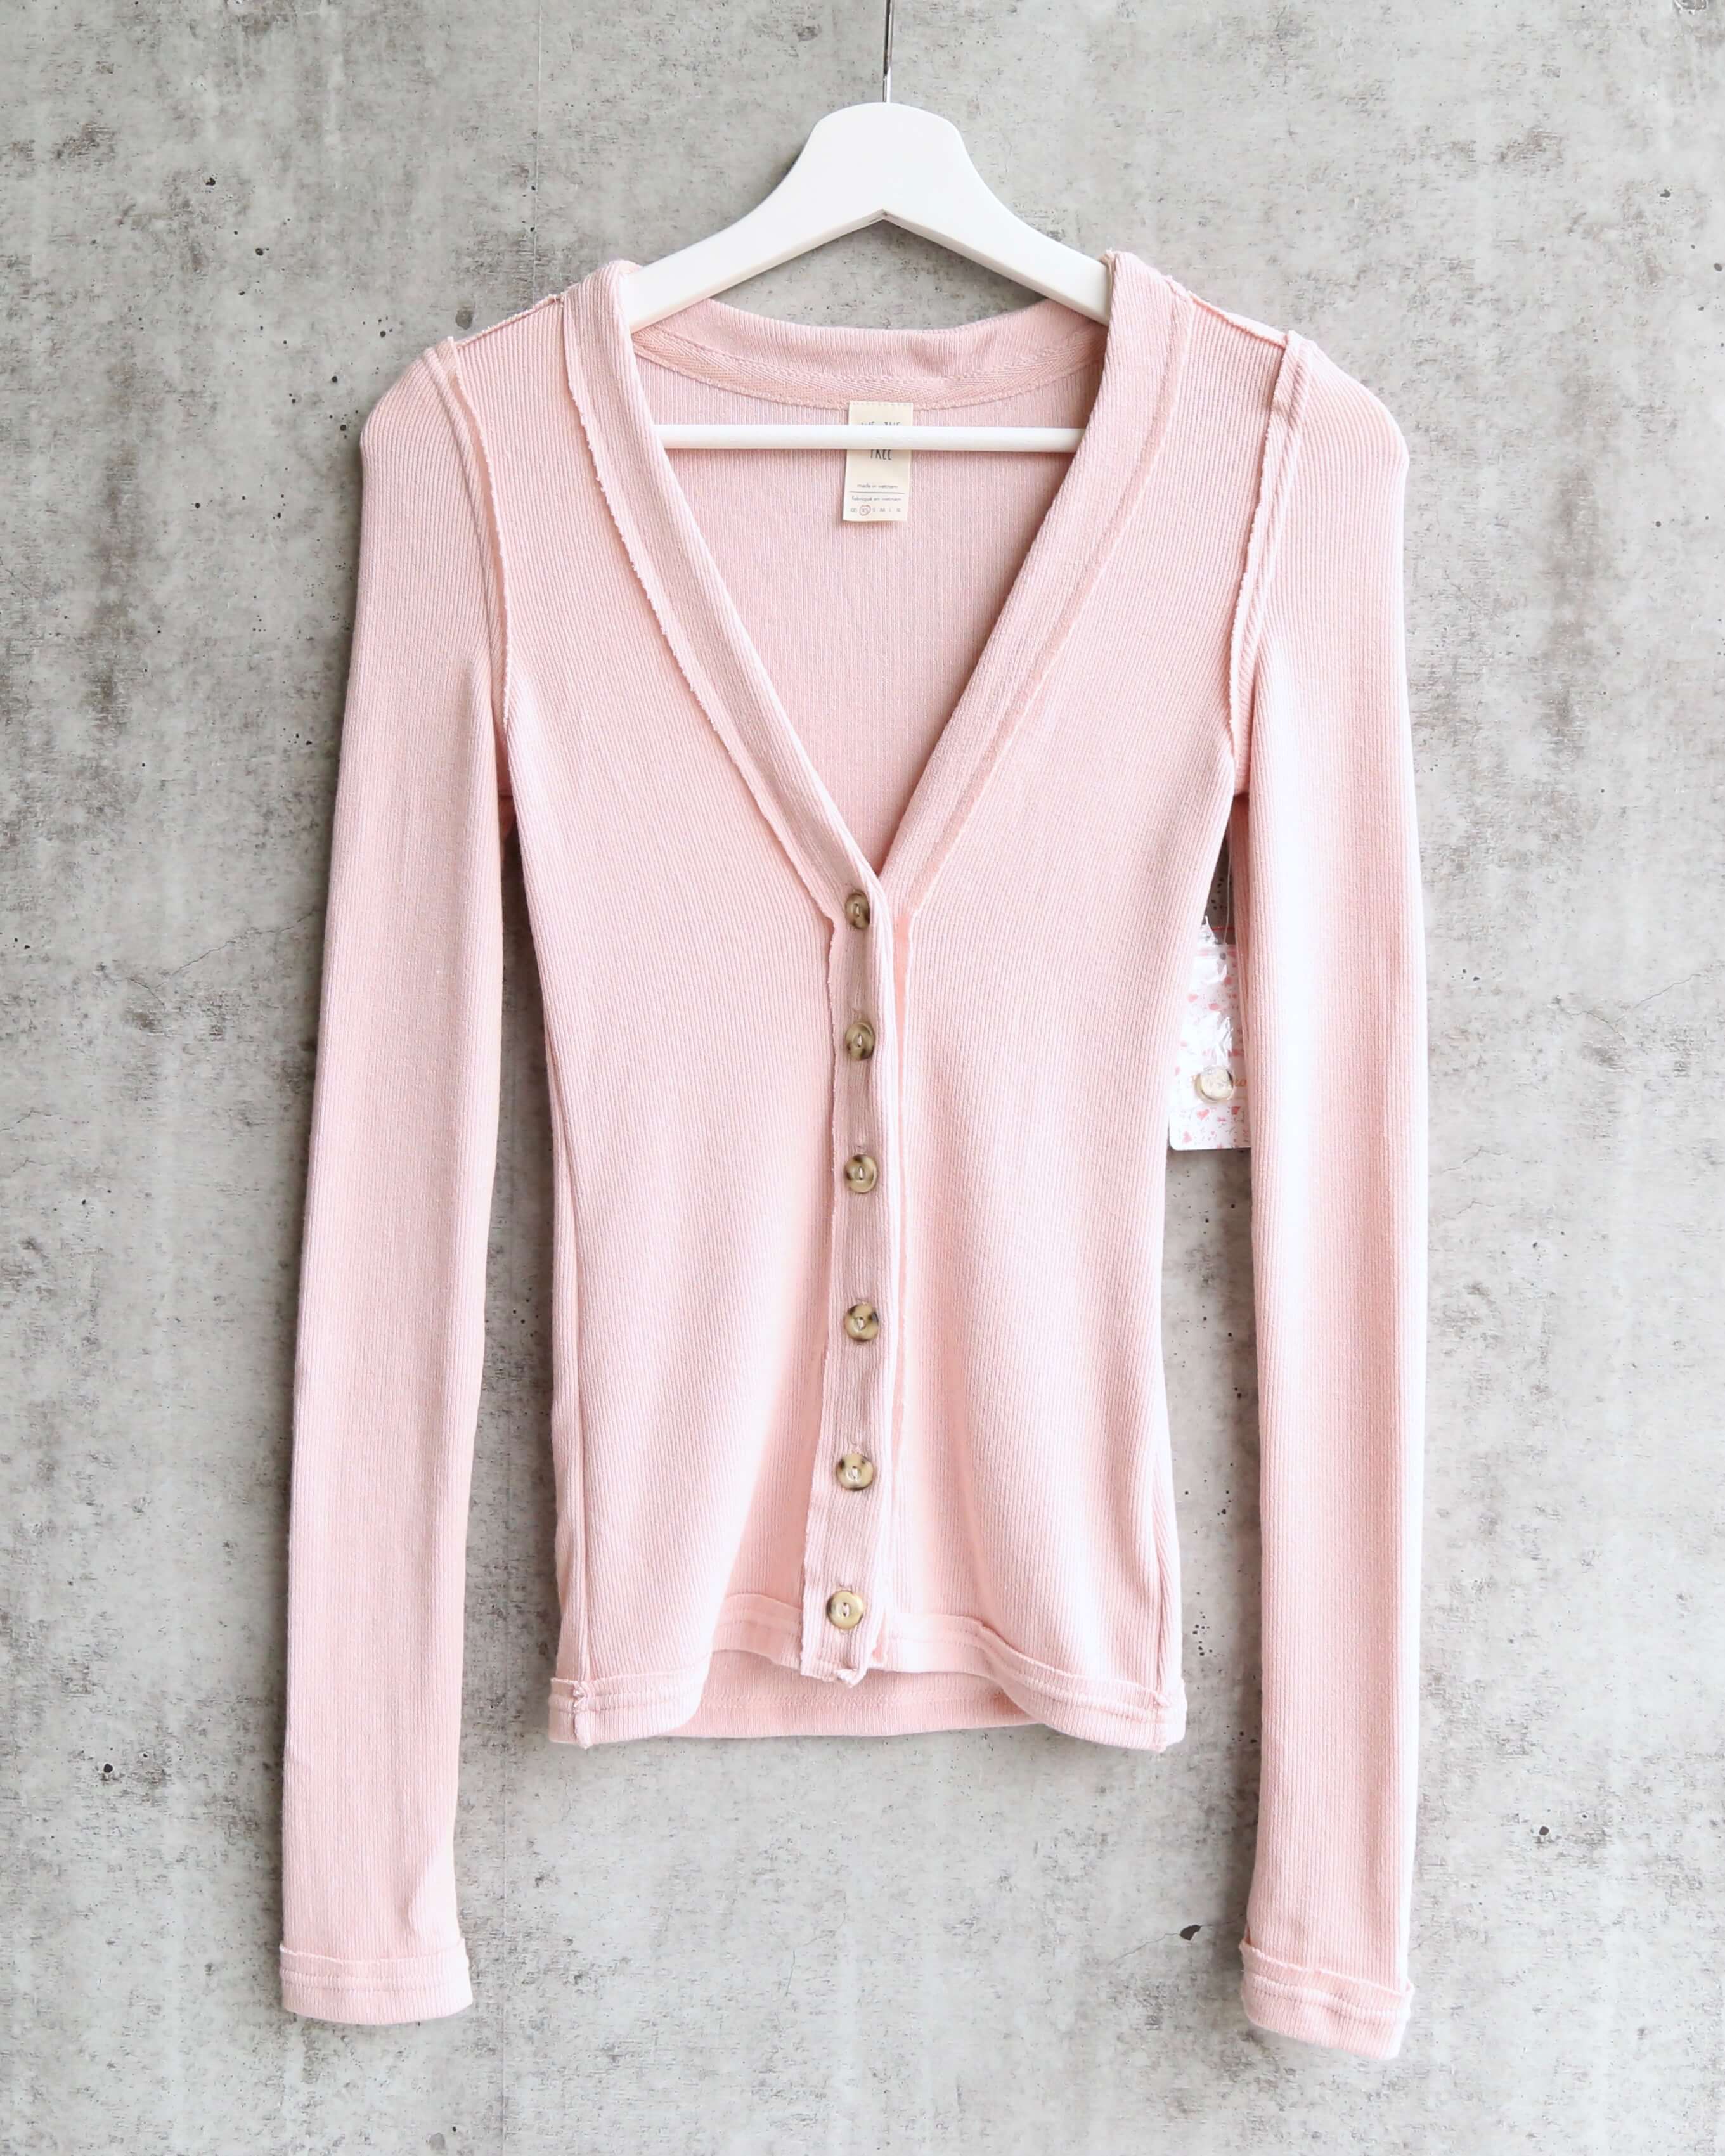 Free People - Call Me Cardi Fitted Button Down Cardigan Top - Pink ...